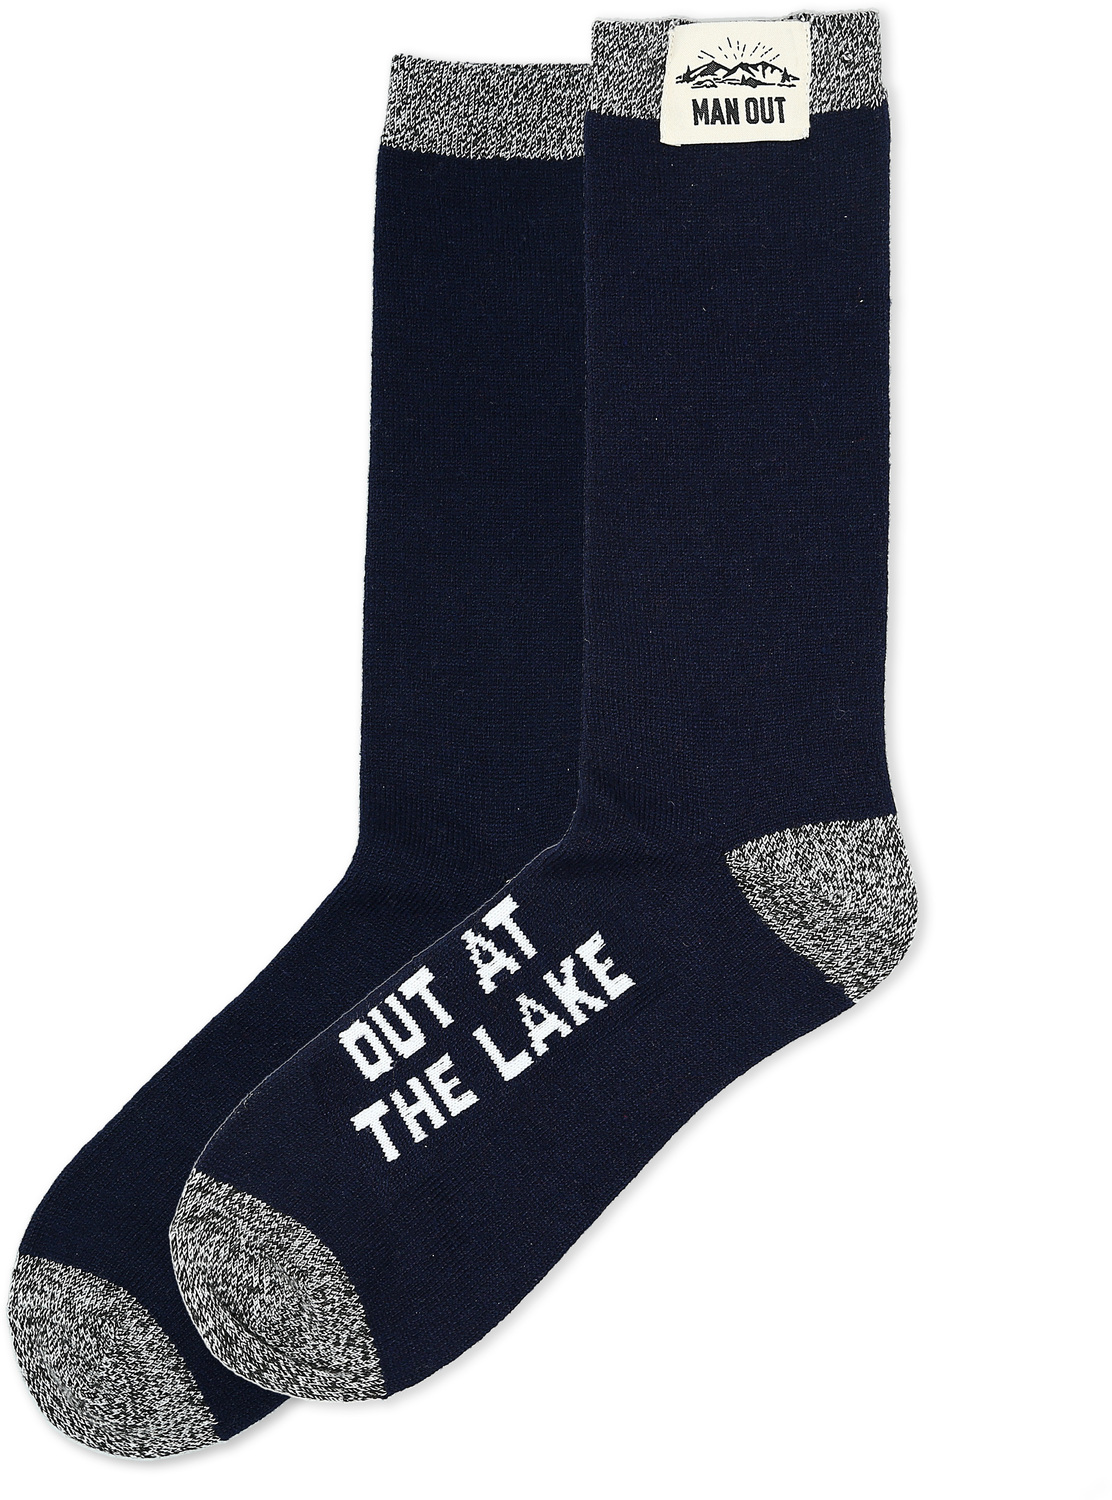 Out at the Lake by Man Out - Out at the Lake - Men's Socks